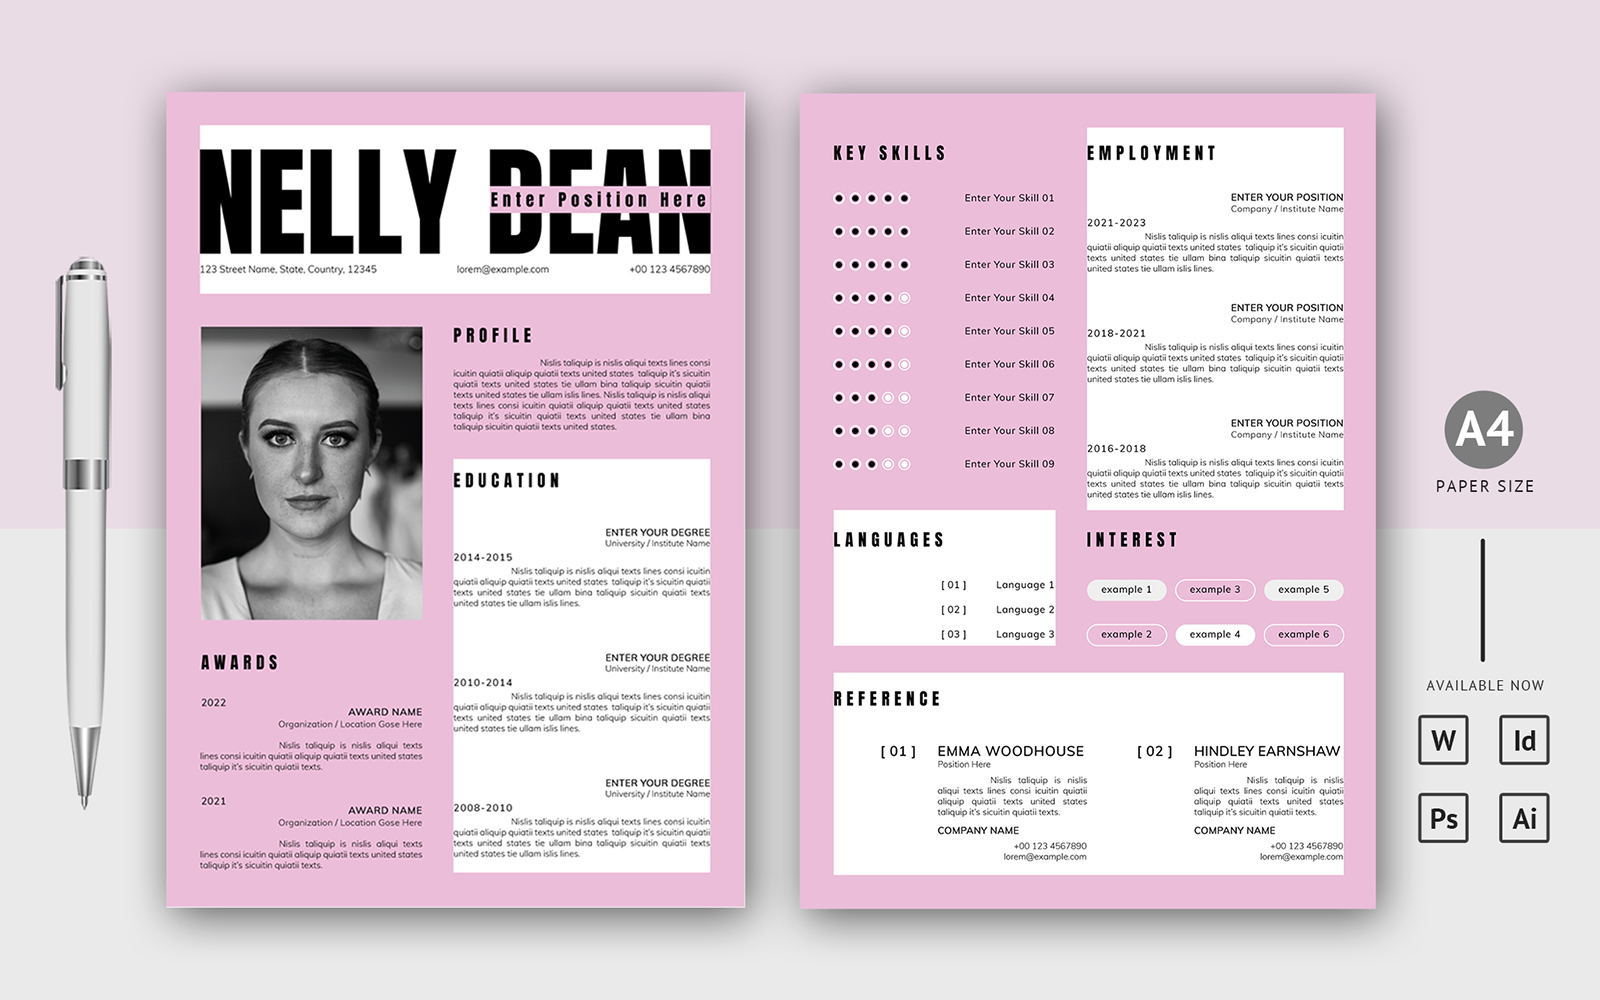 Fashionable Printable Resume / CV Template with Cover Letter for Job